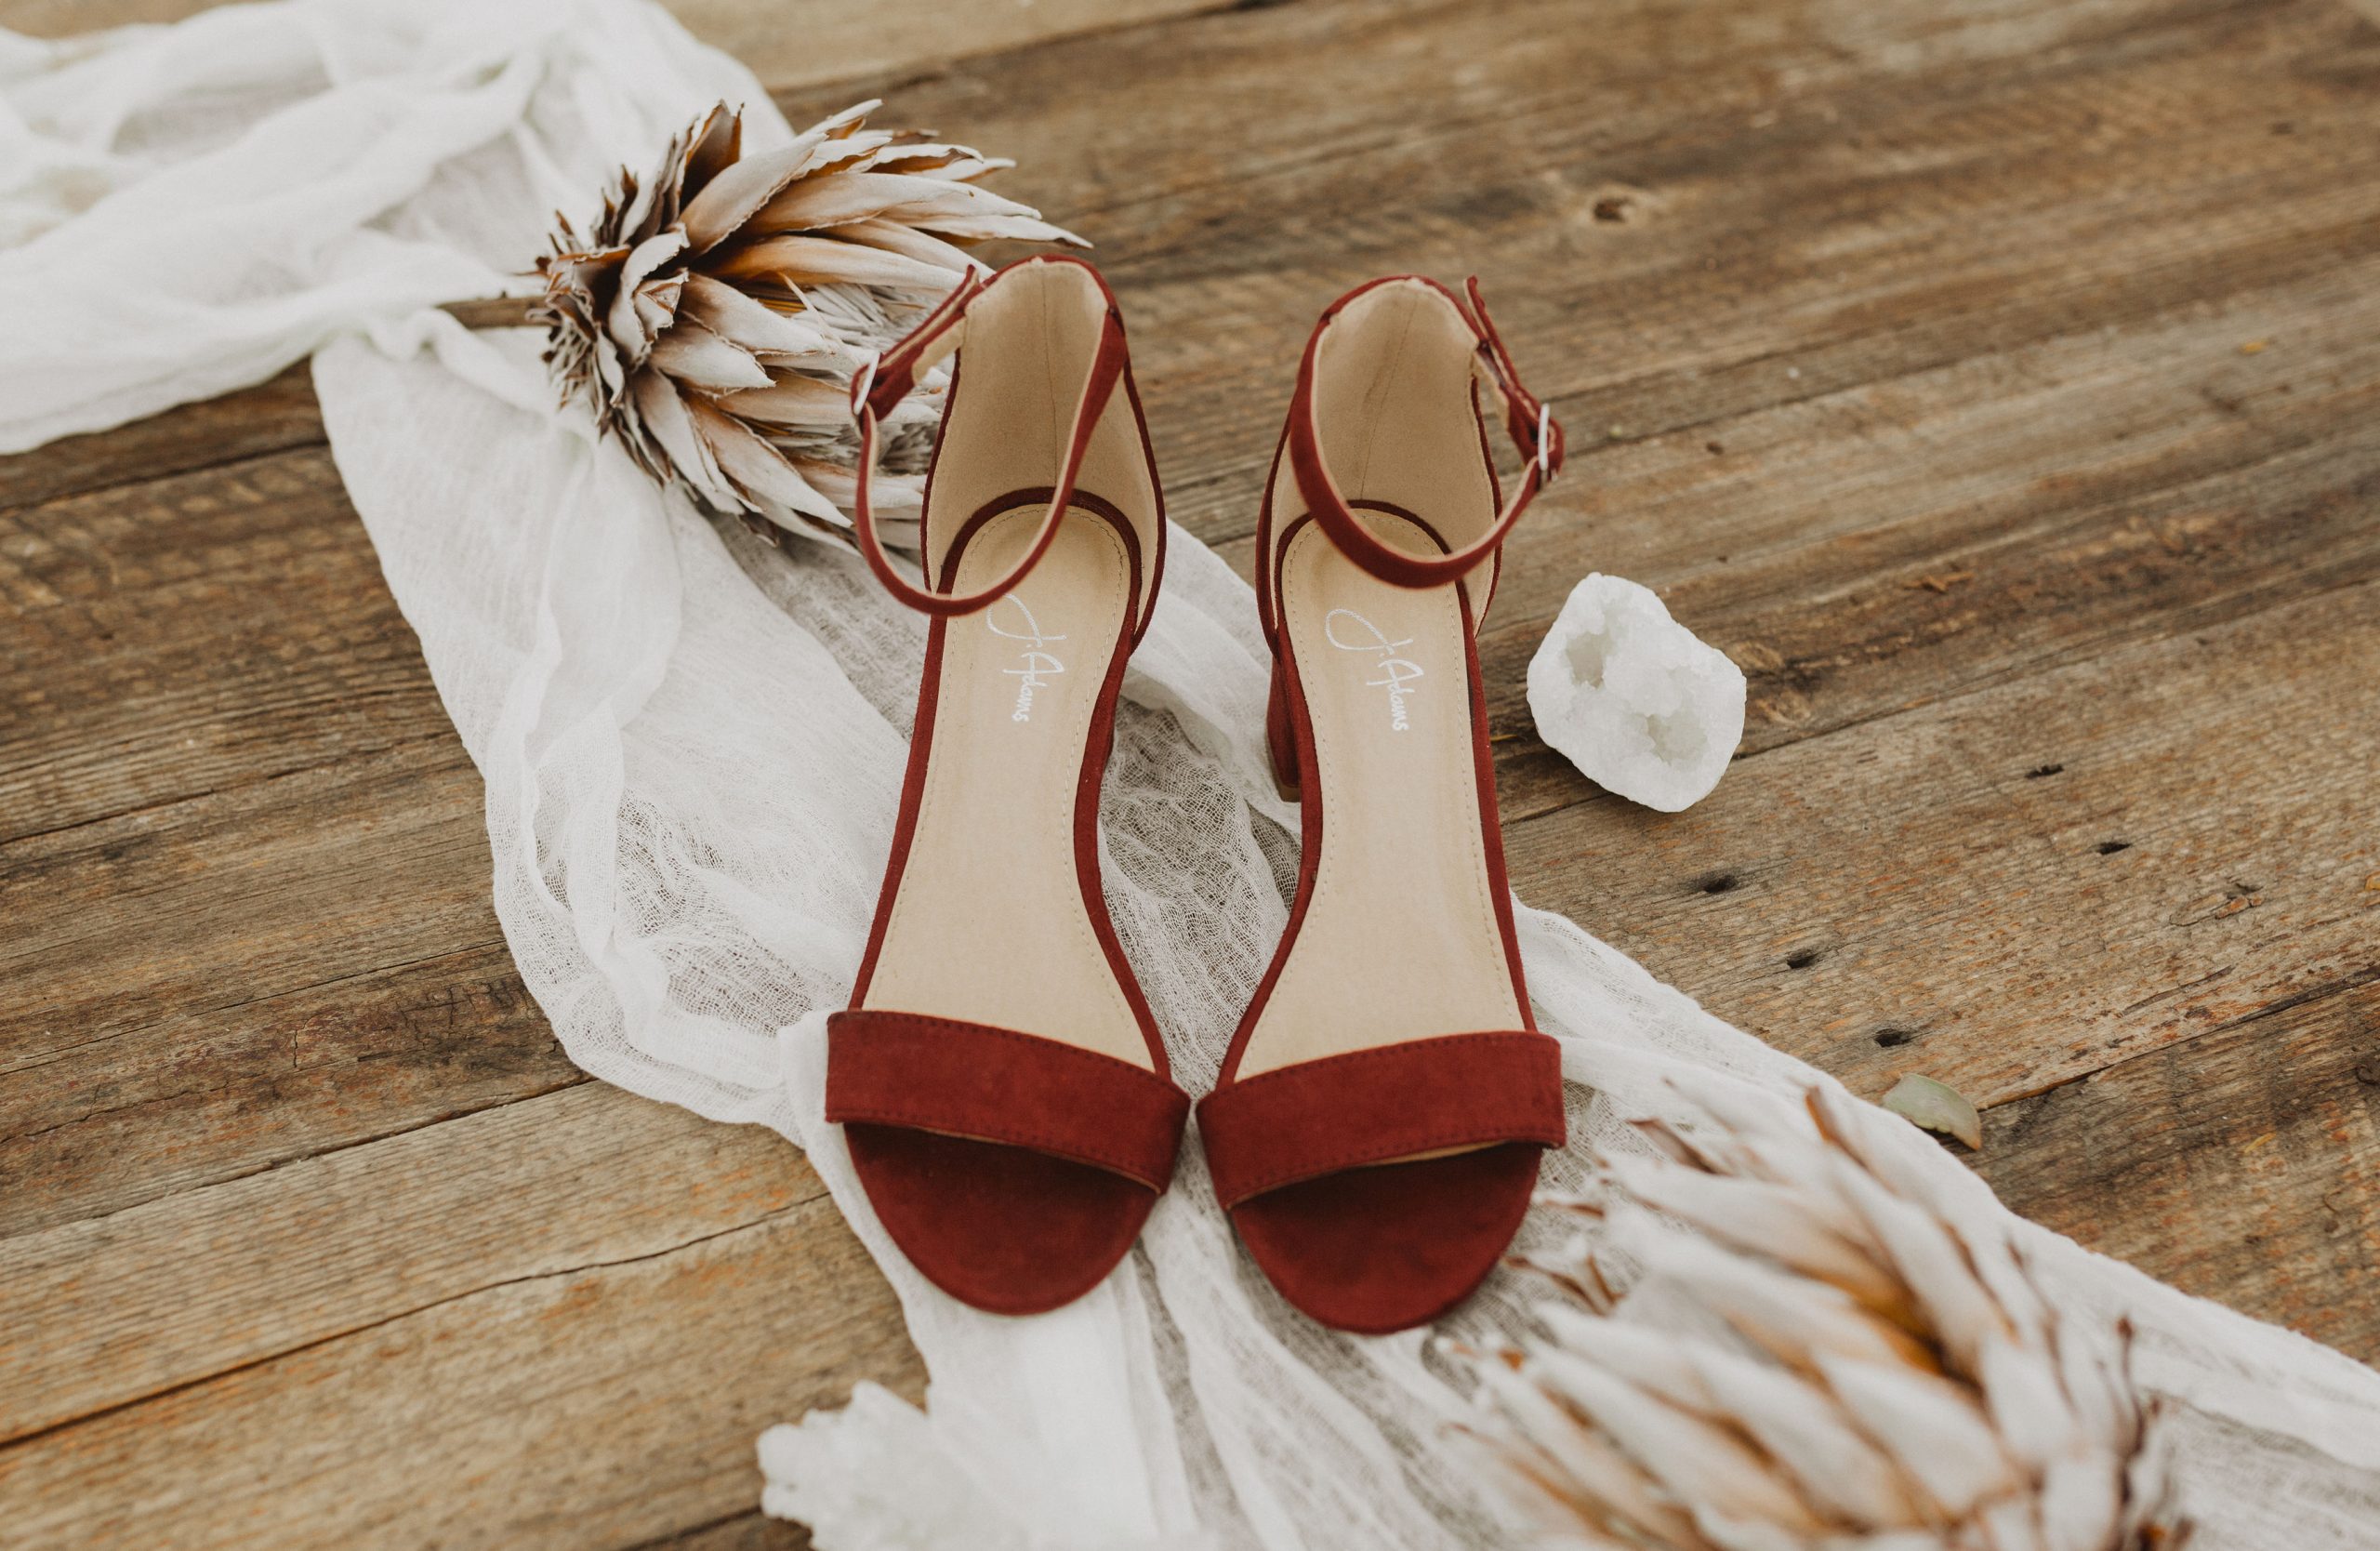 Styleguide For The Bride: Eight Stunning Bridal Shoes For The Aisle